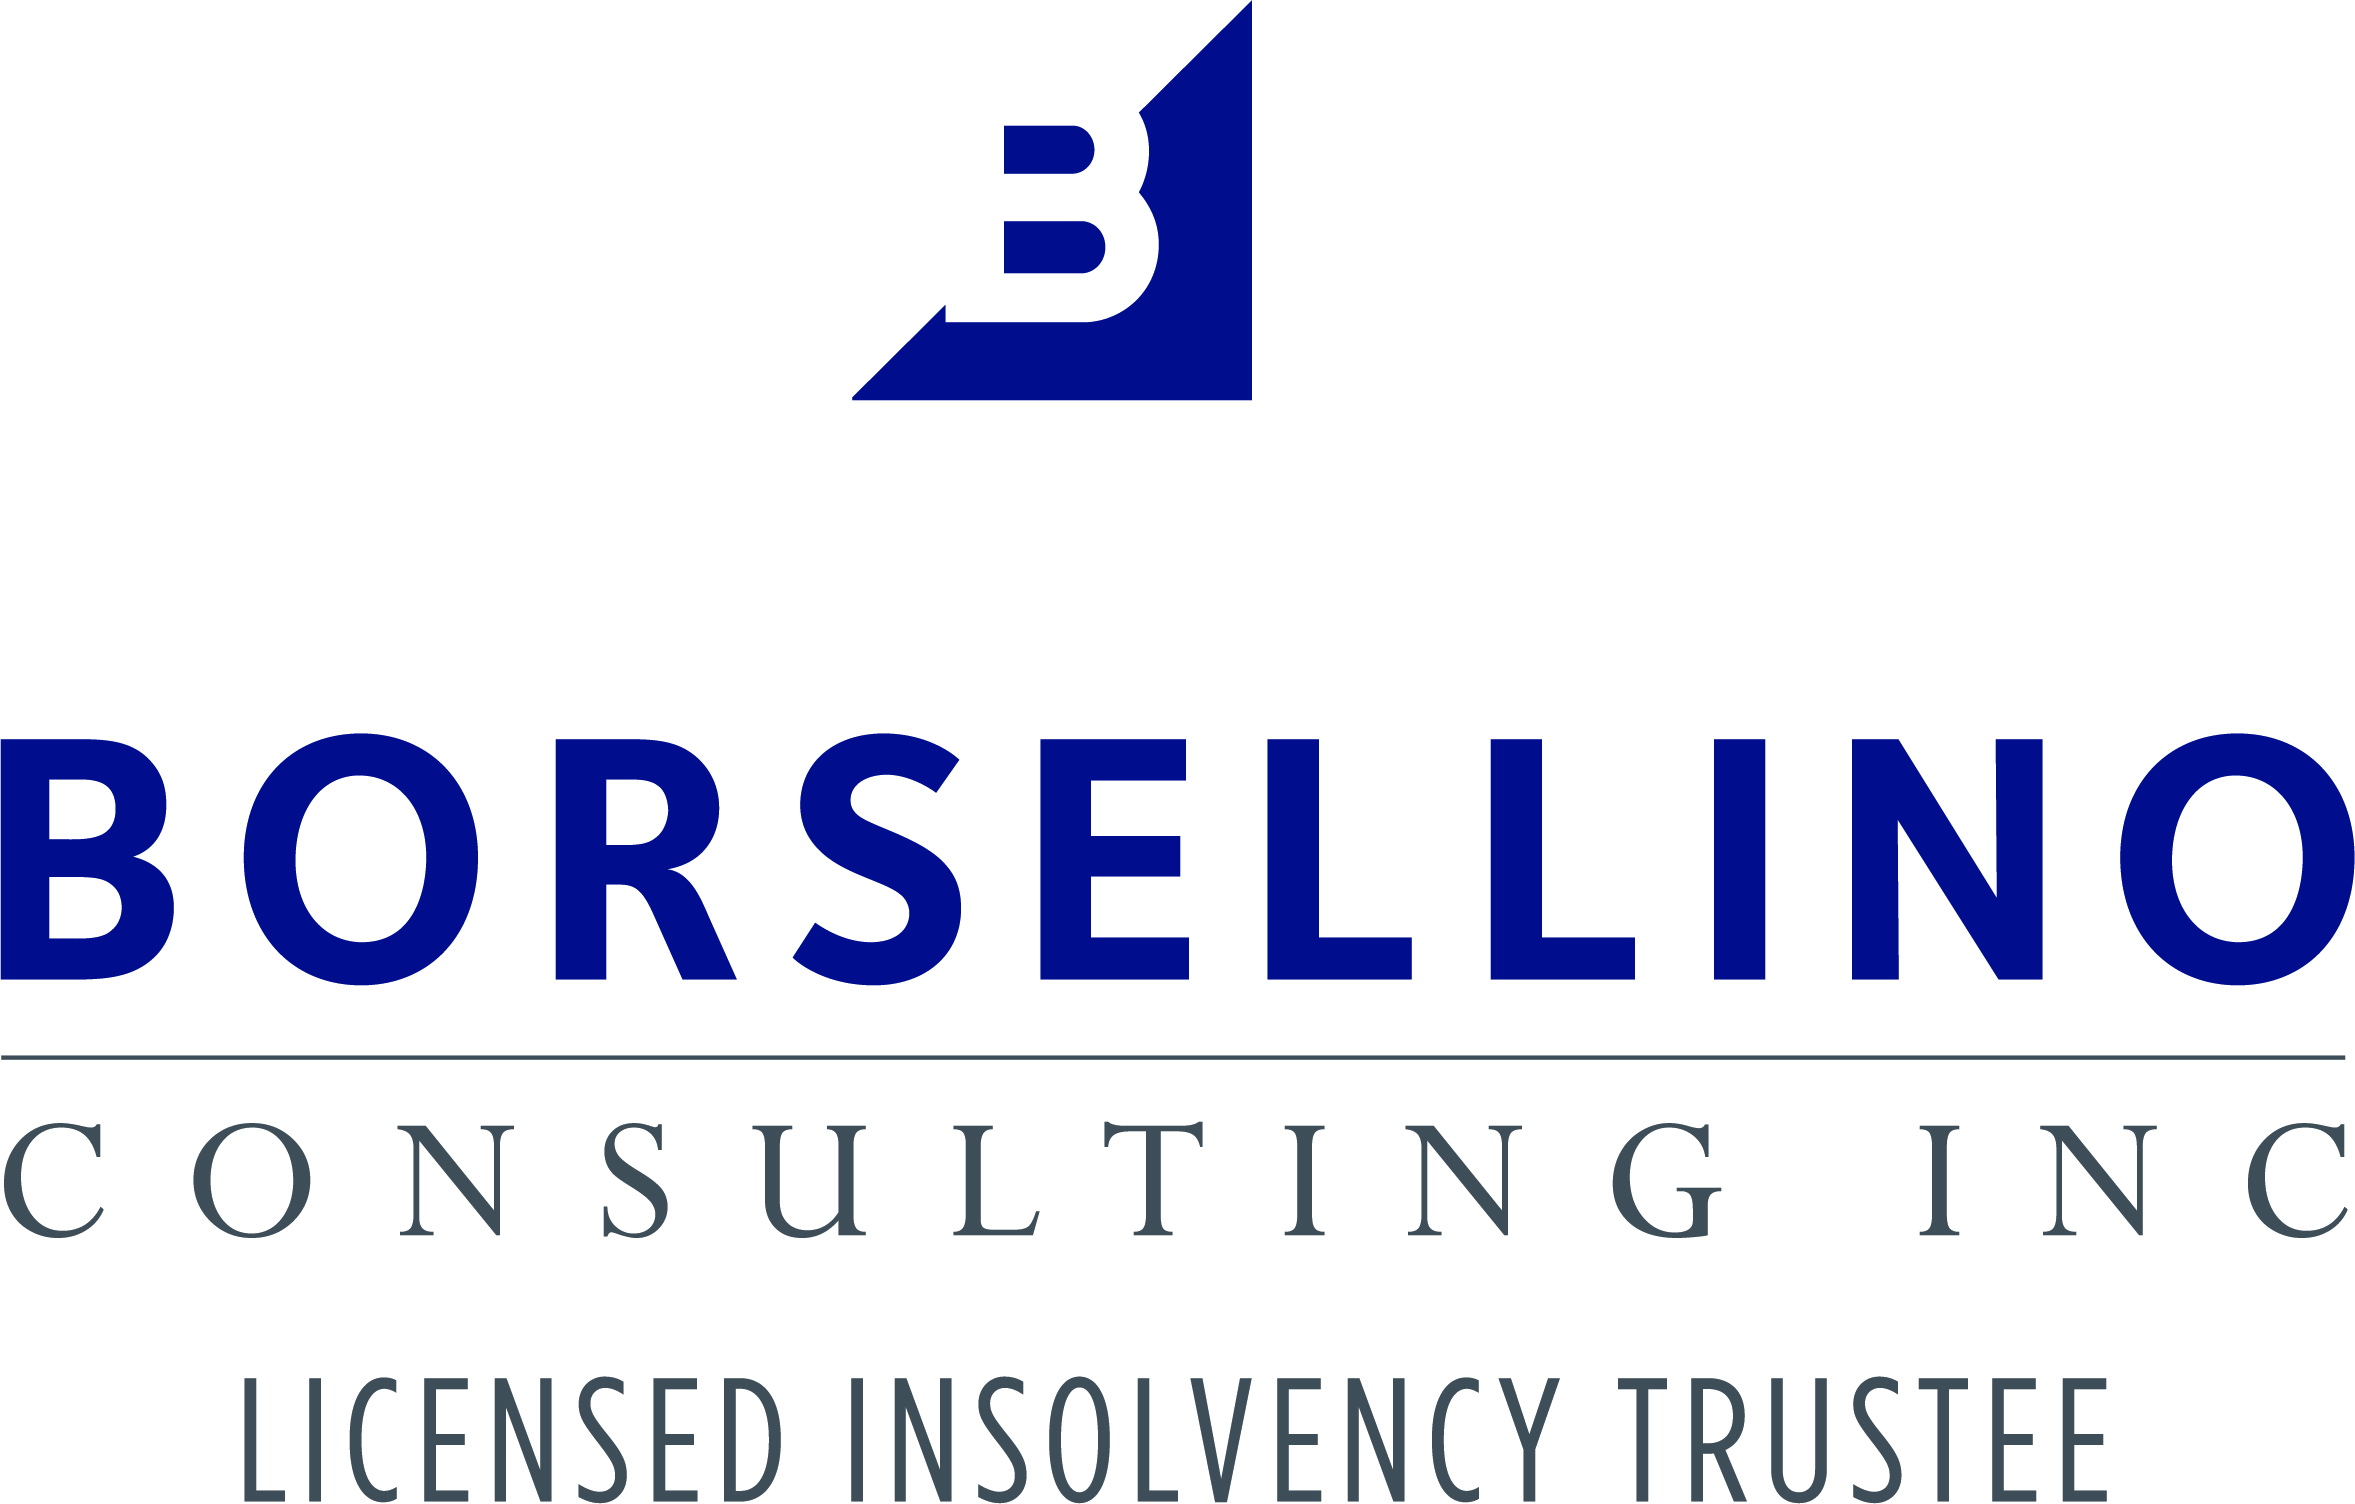 Borsellino Consulting Inc., Licensed Insolvency Trustee